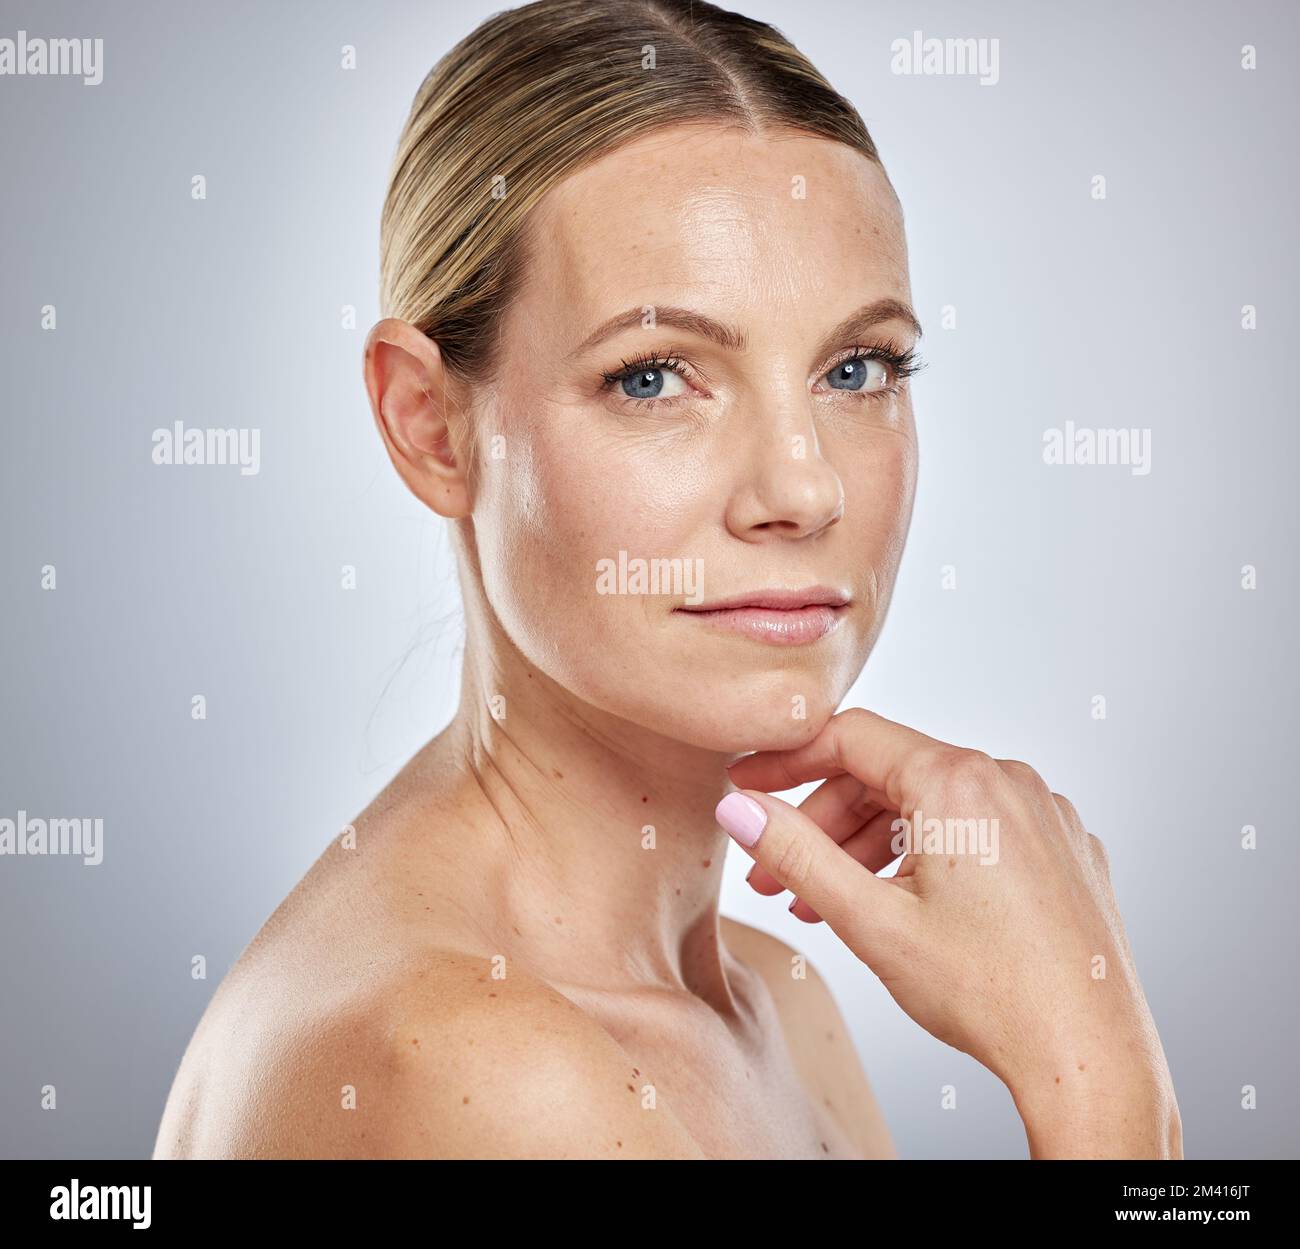 Health, beauty and natural portrait of woman with clean, hydrated and glowing skin aesthetic. Dermatology, skincare and confident cosmetic model Stock Photo